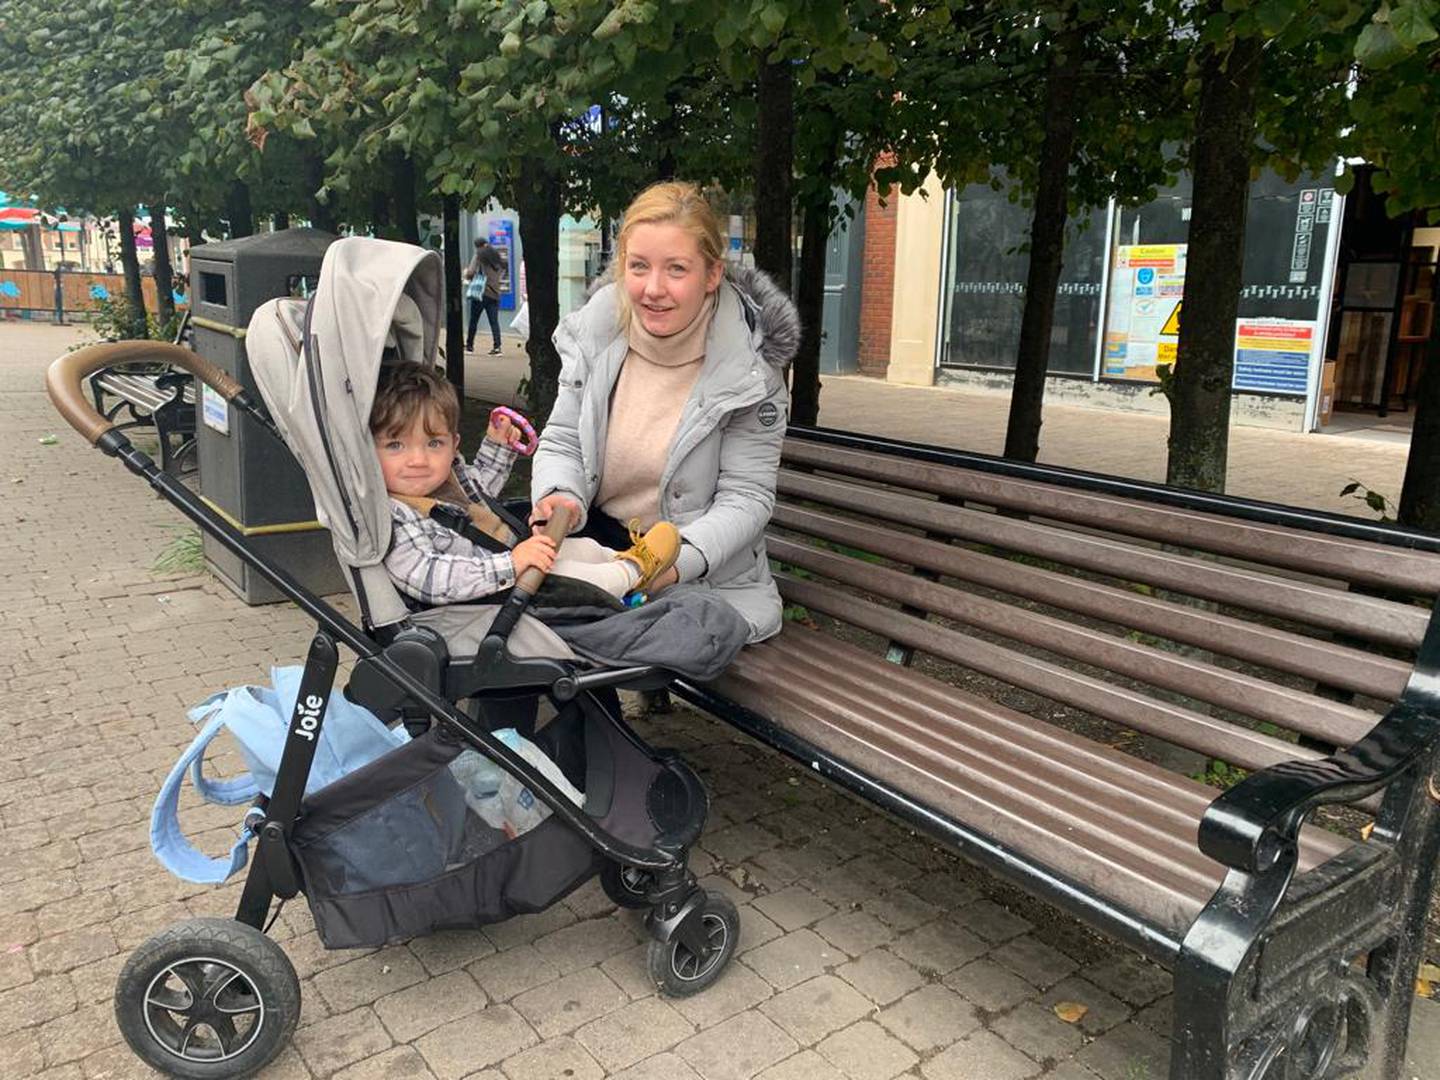 Sophie Wilson, pictured with her son in Staines, is unconvinced the government can deal with pressing problems. The National

